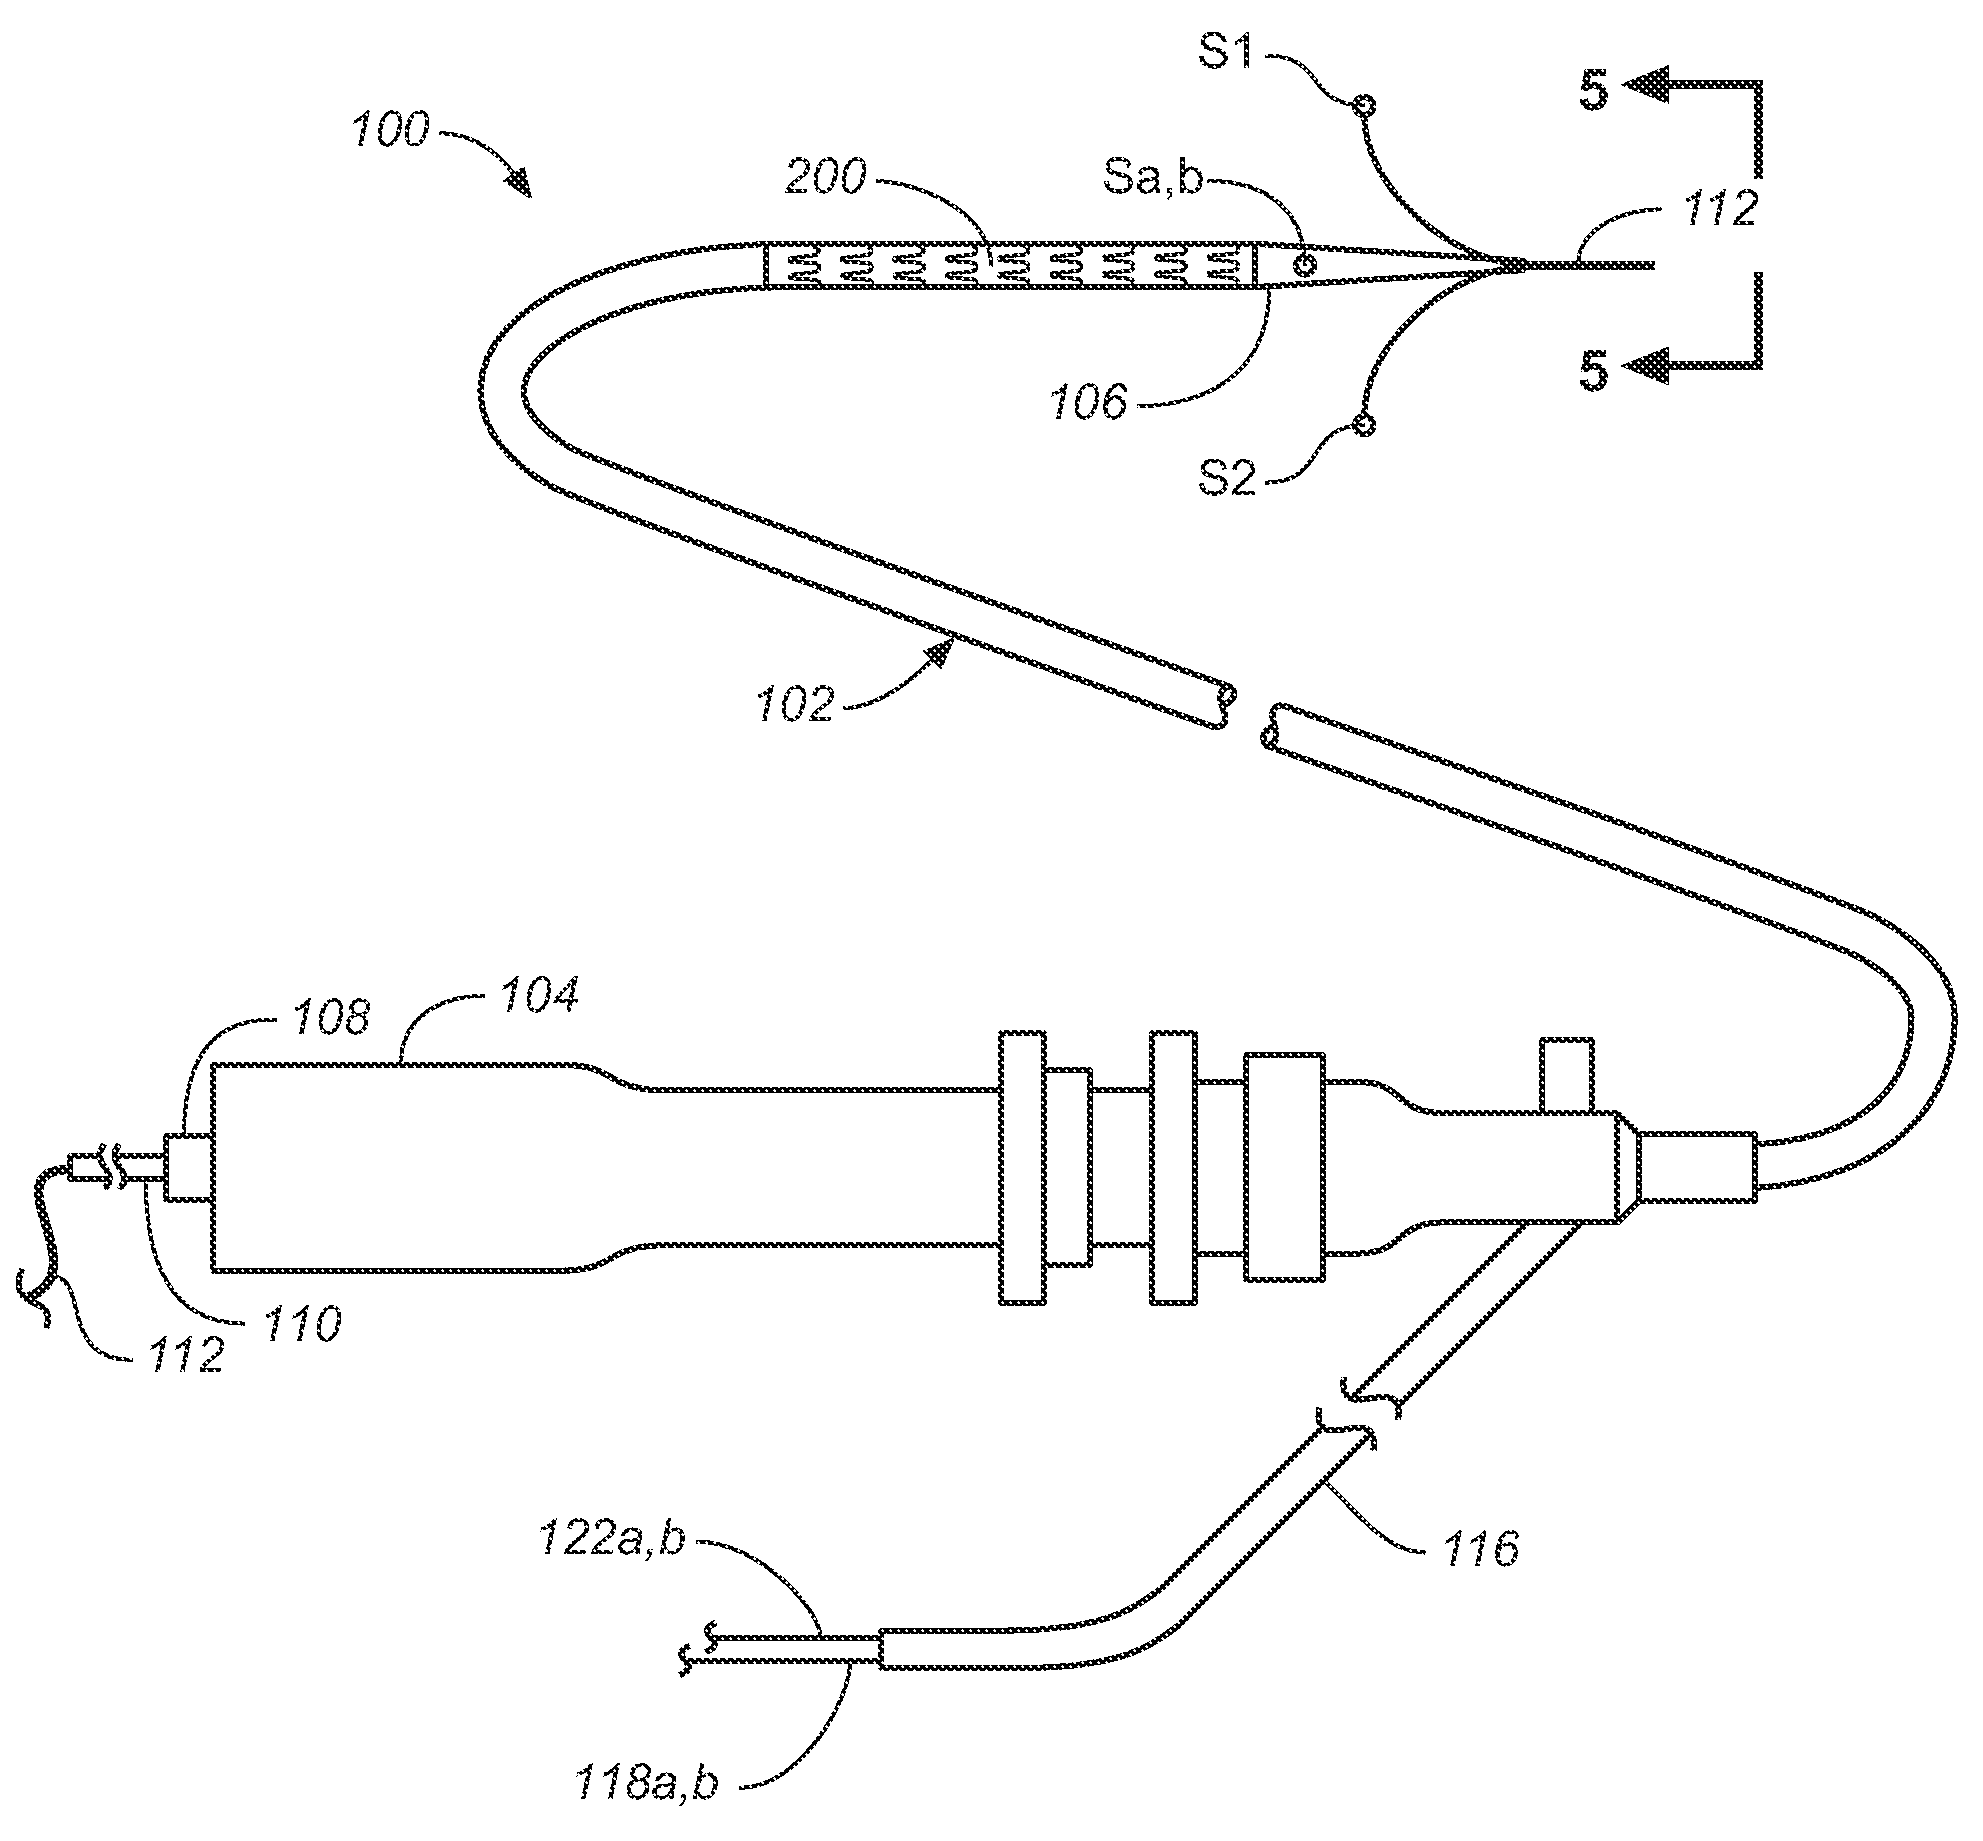 Vascular Position Locating Apparatus and Method